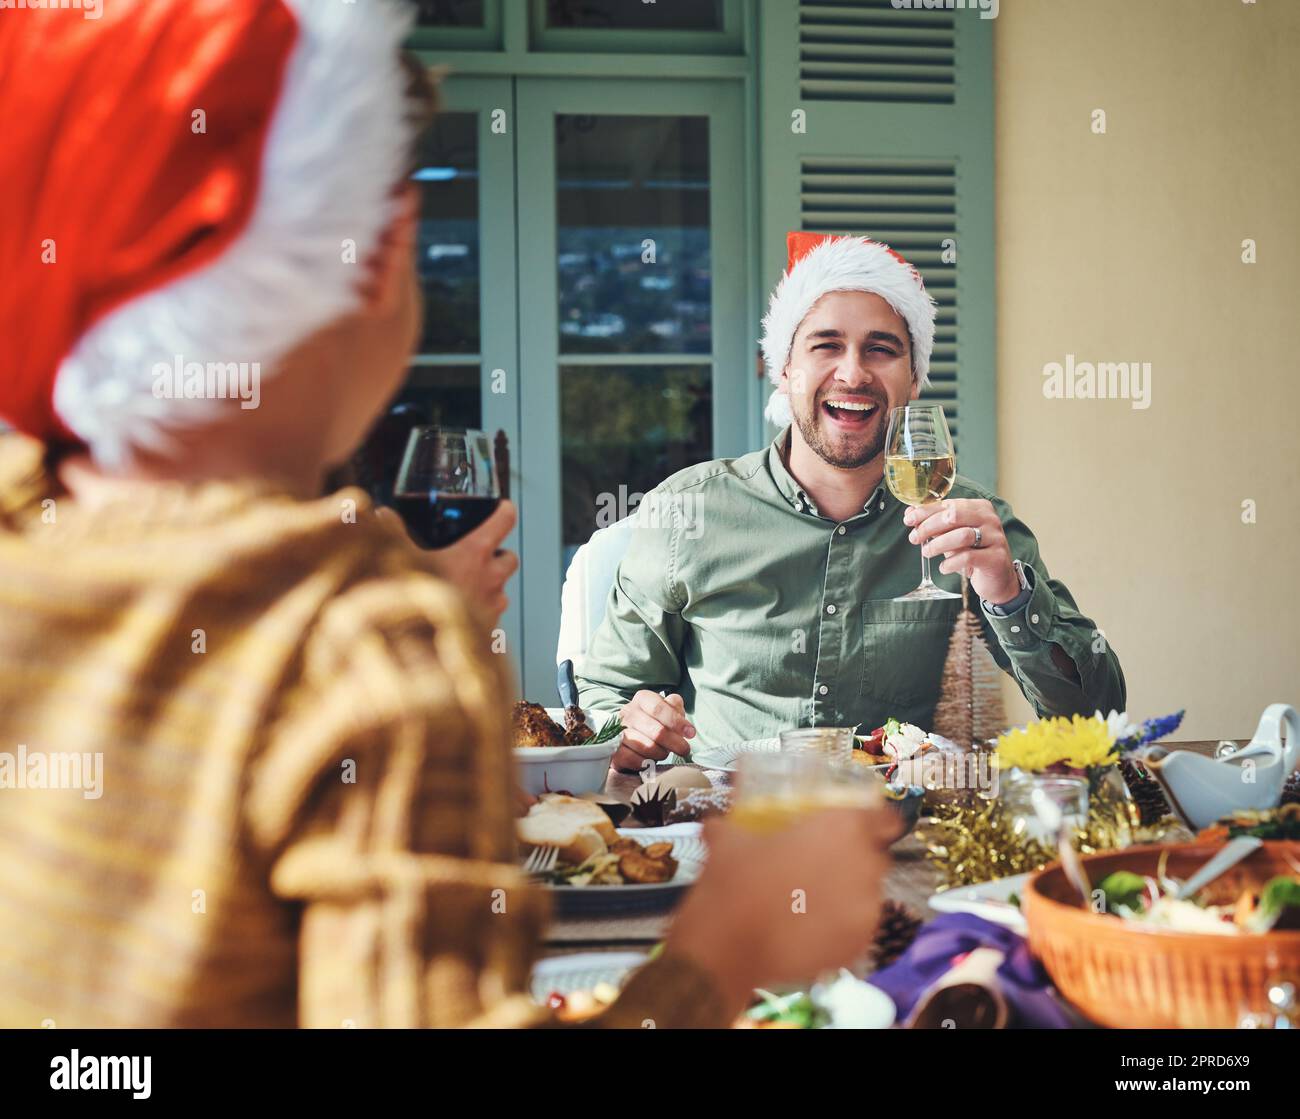 Hes feeling very merry today. Portrait of a handsome young man enjoying himself at a Christmas lunch party with friends and family. Stock Photo